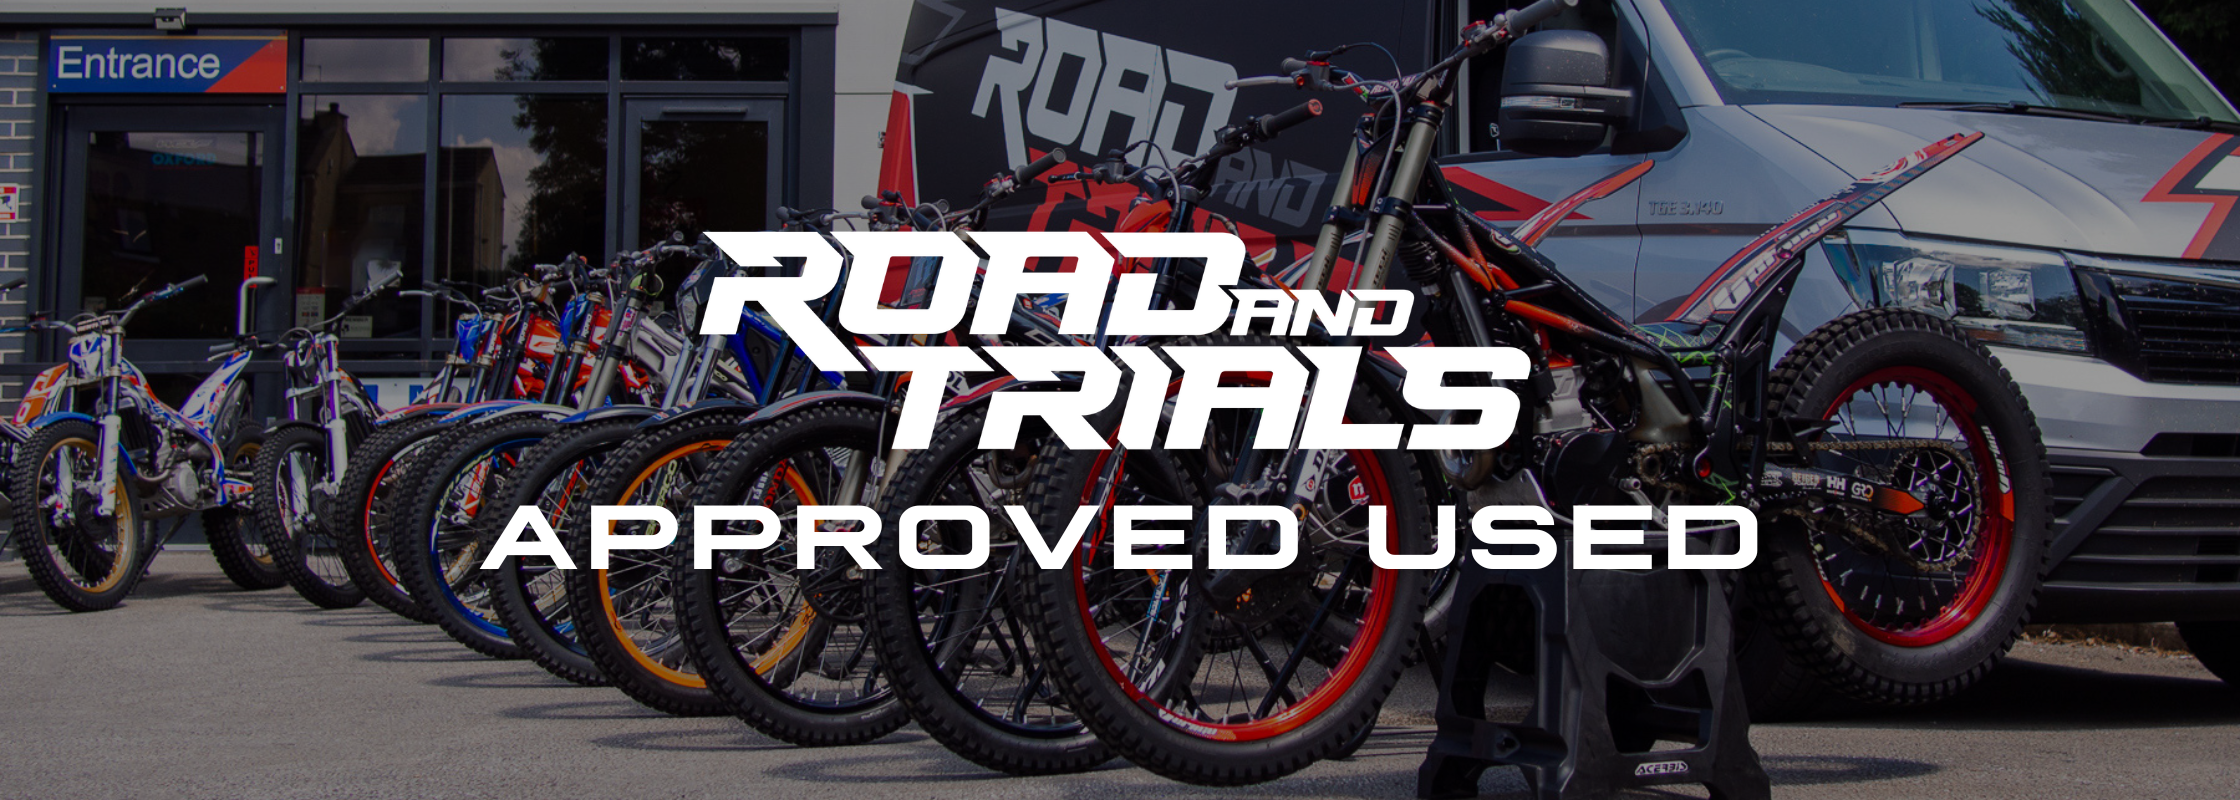 Approved Used Trials Bikes